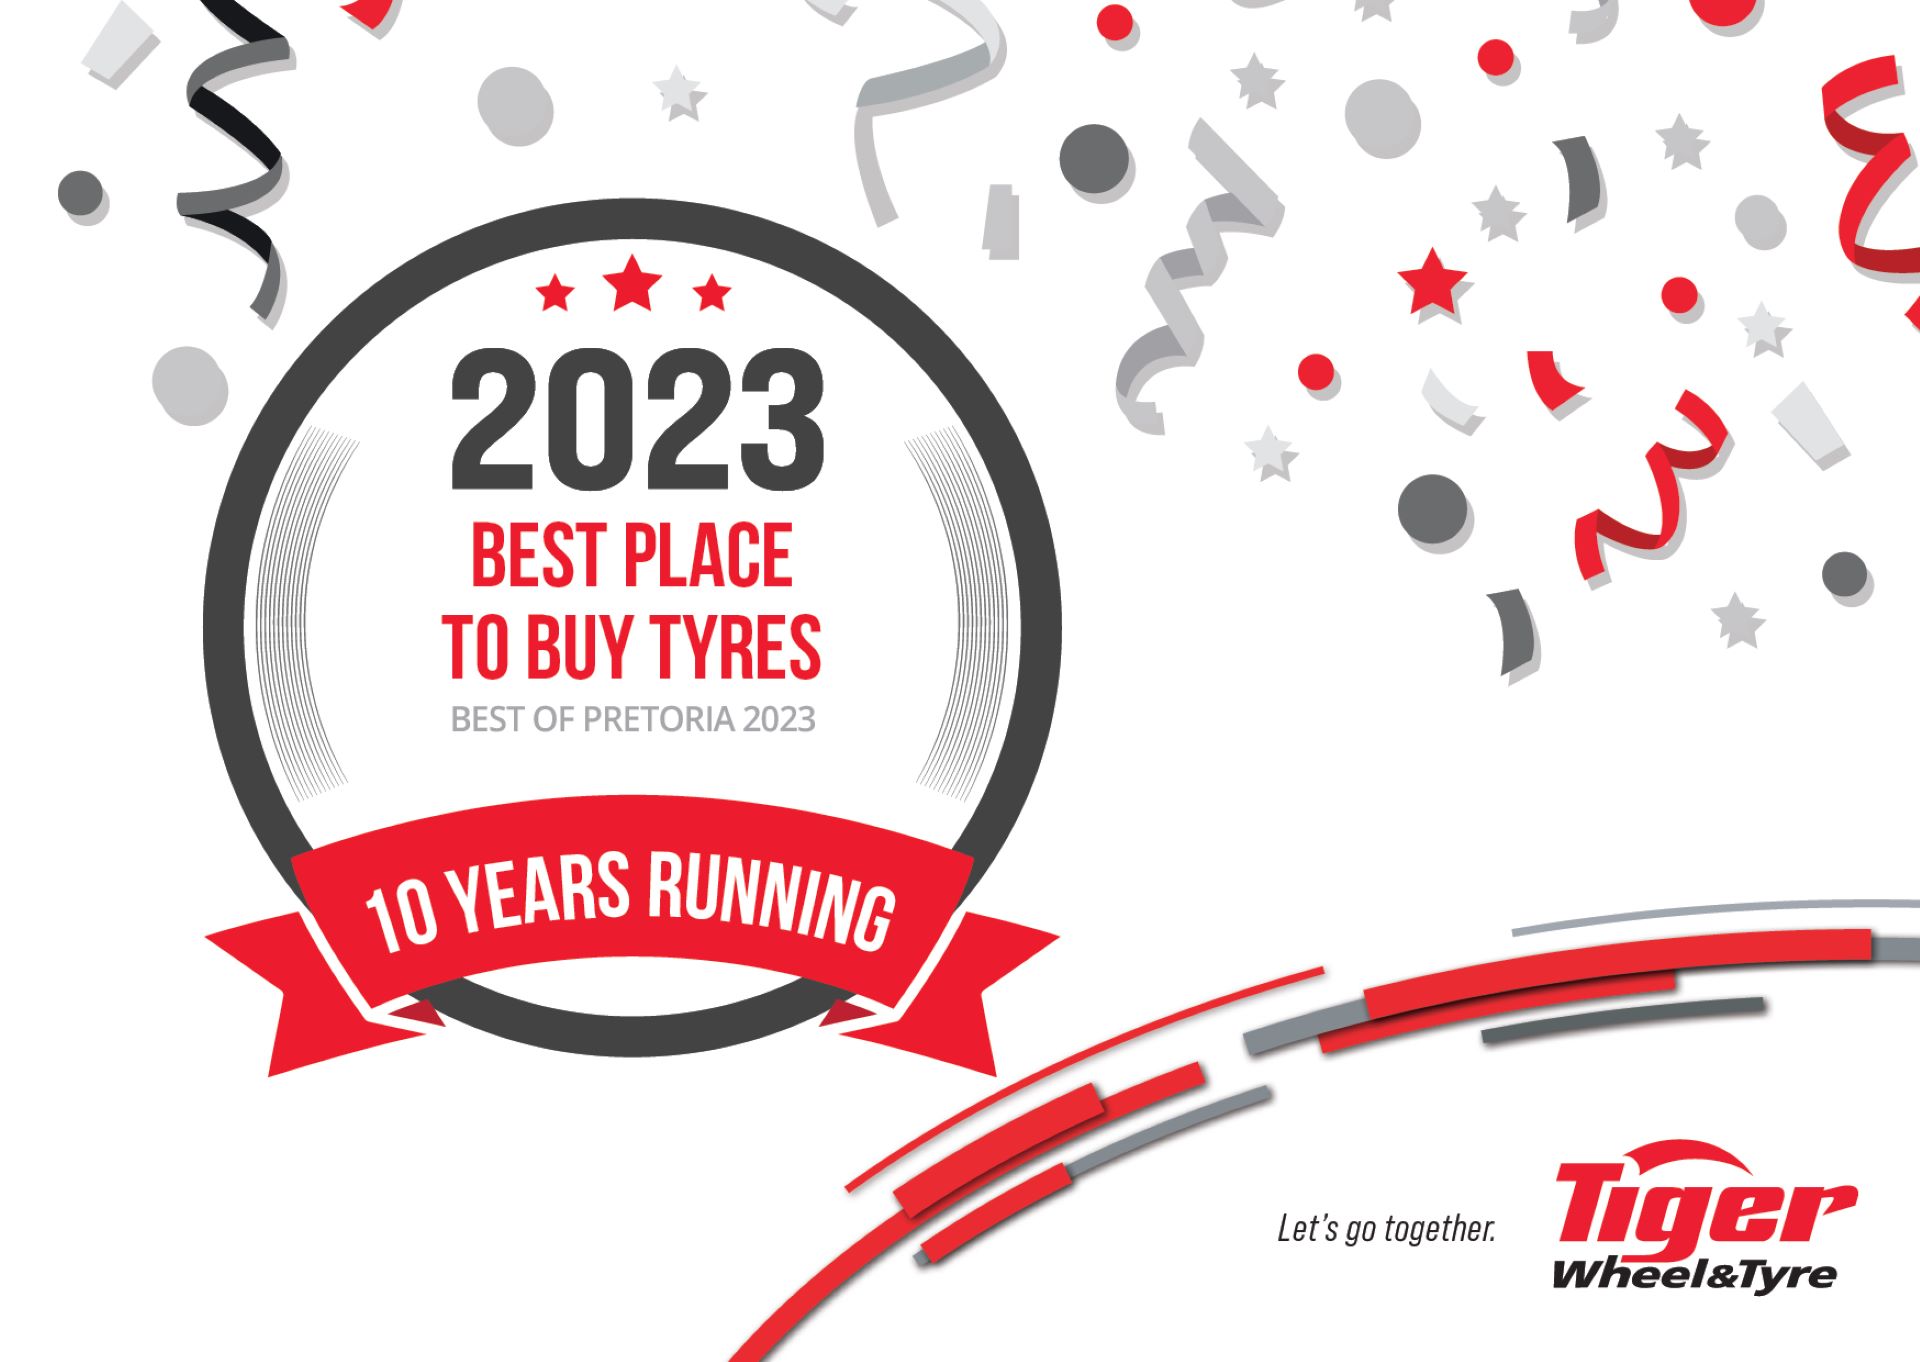 Motorists Vote Tiger Wheel & Tyre “The Best Place to Buy Tyres in Pretoria”